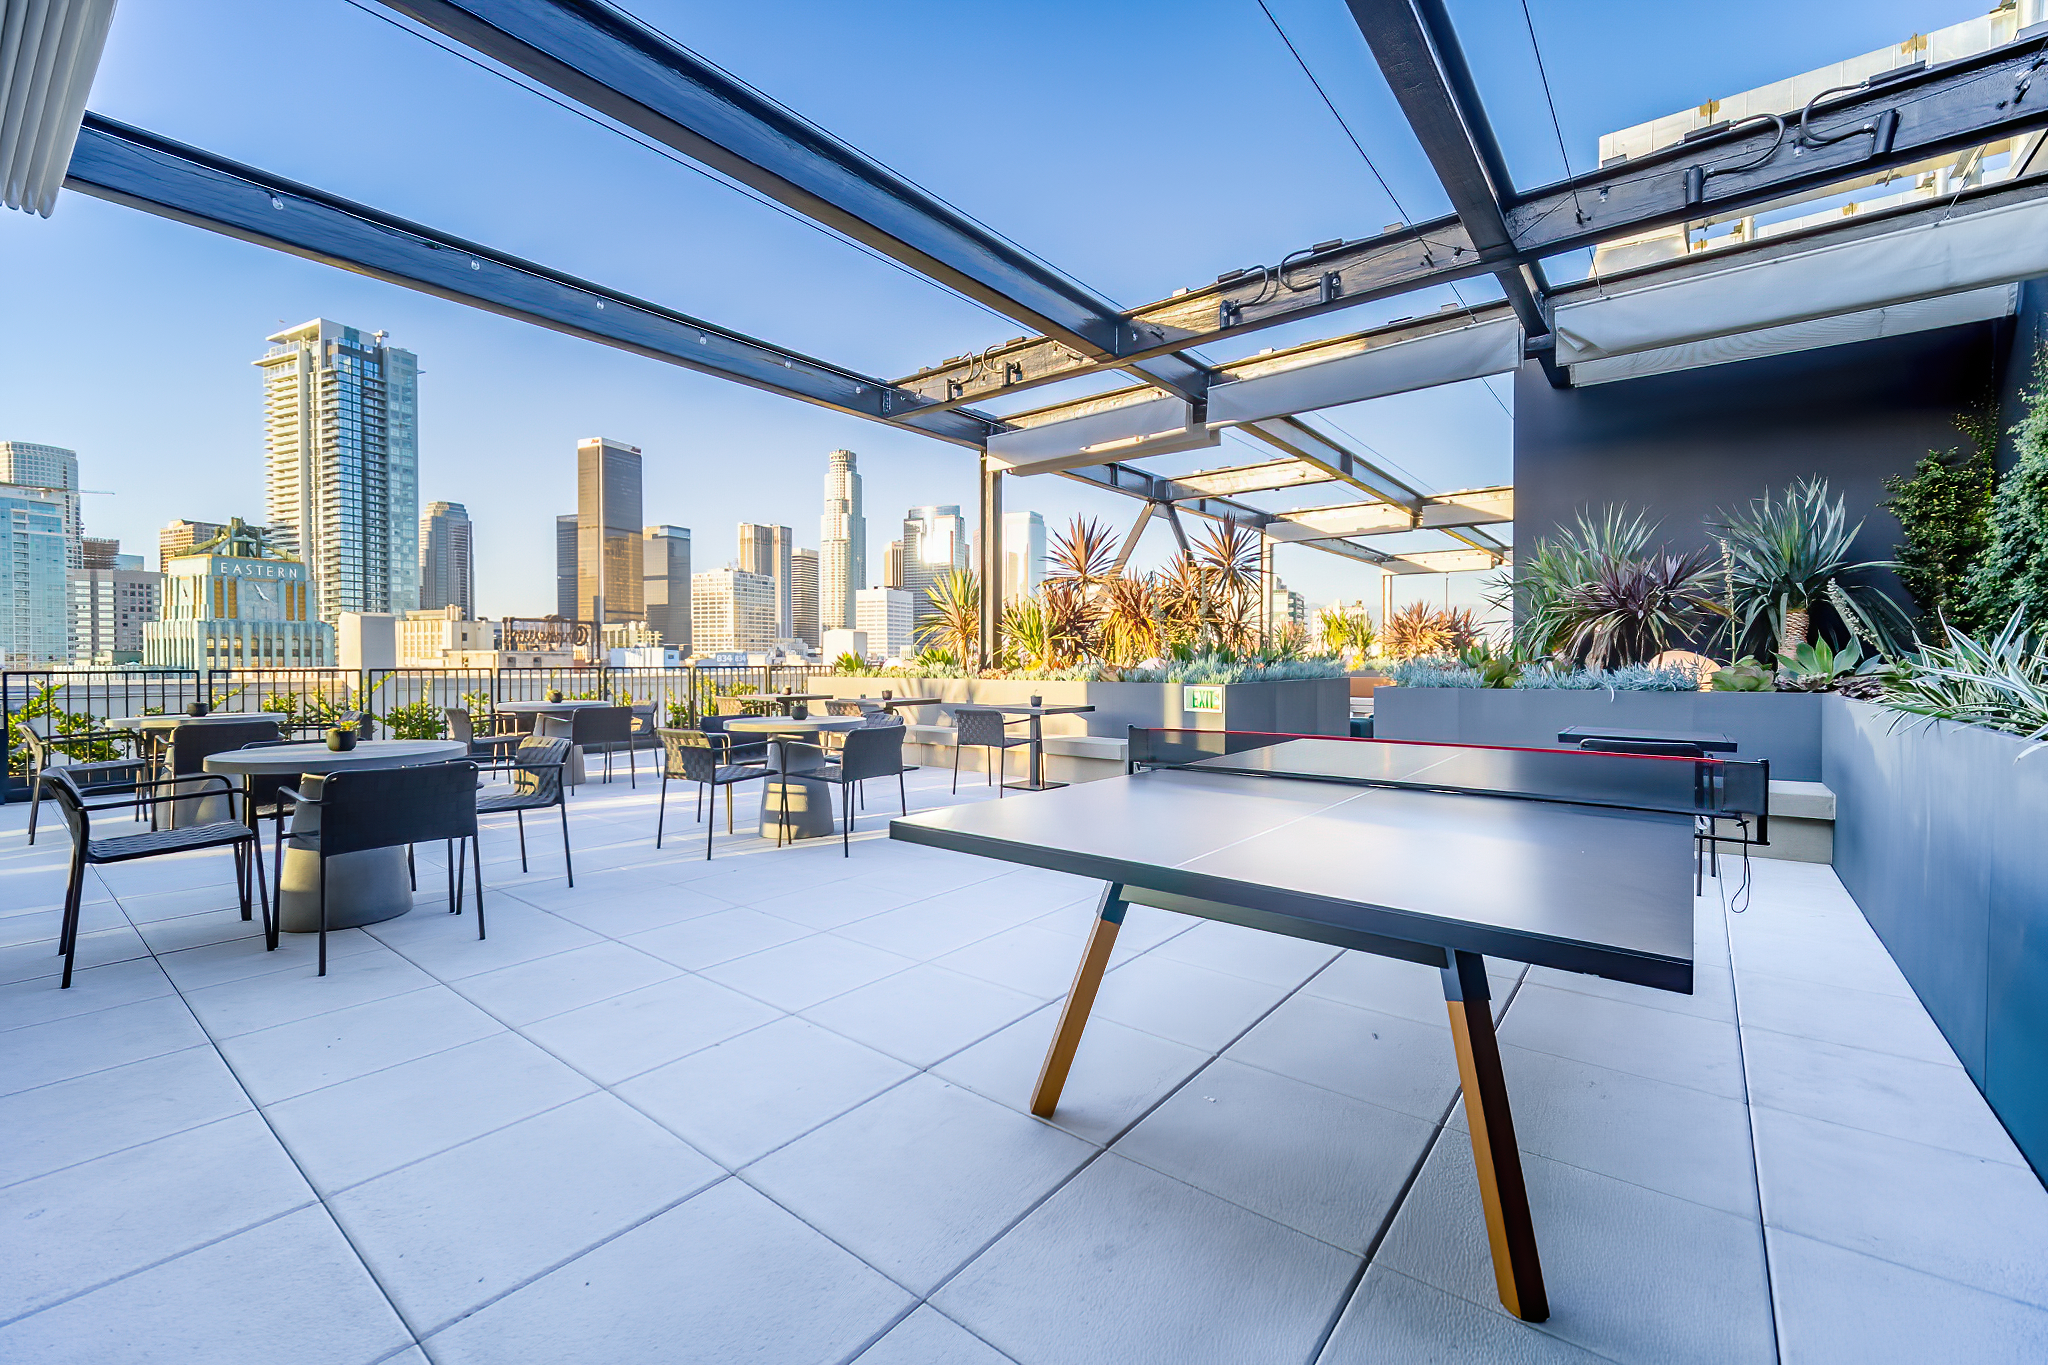 California Market Center (CMC) roof top deck with tables and chairs